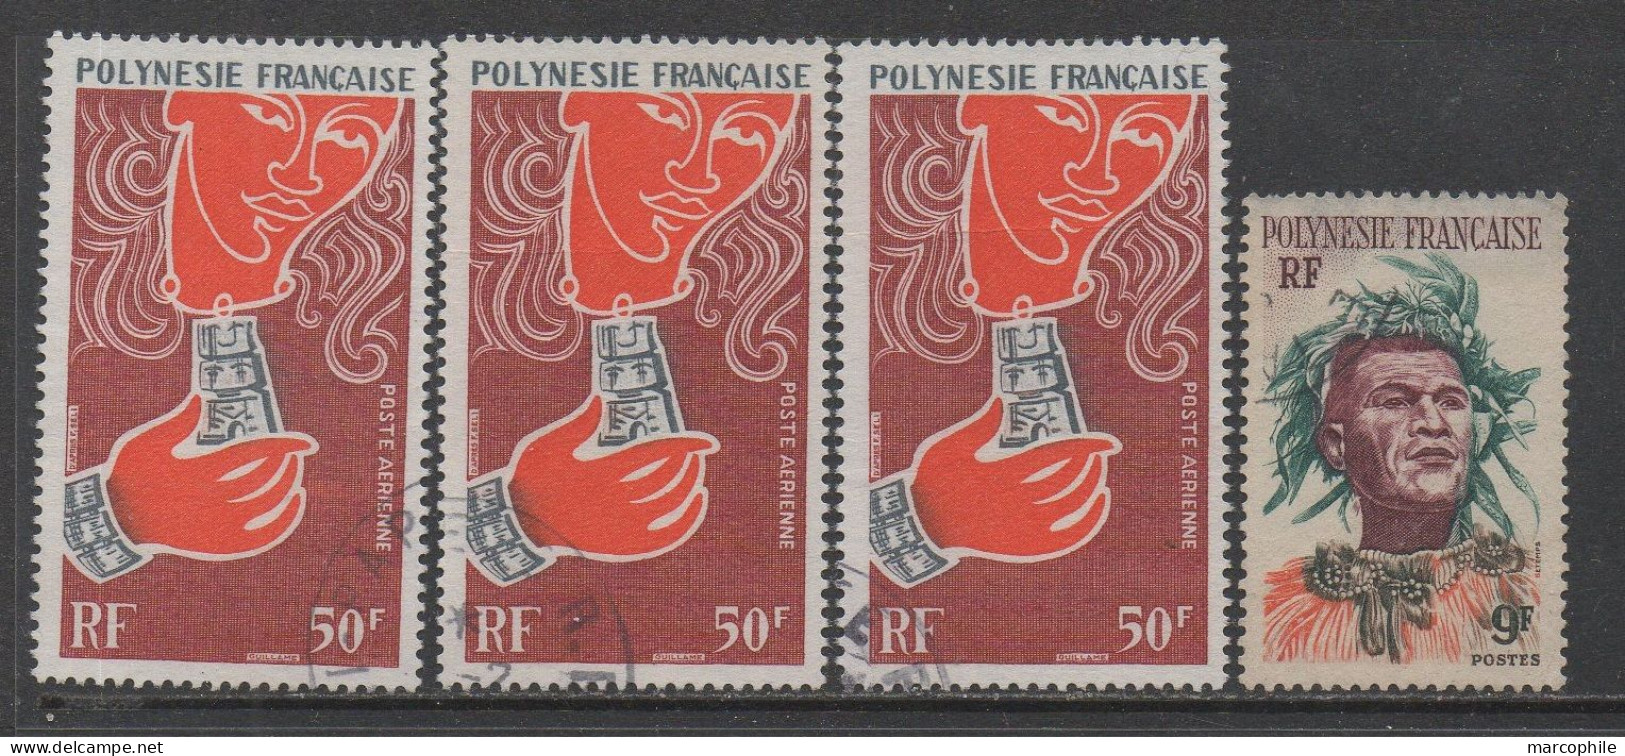 POLYNESIE FRANCAISE / 1970 - PA 35 X 3 OBLITERES (+ # 8 Offert) / COTE + 25.00 € (ref 550a) - Used Stamps